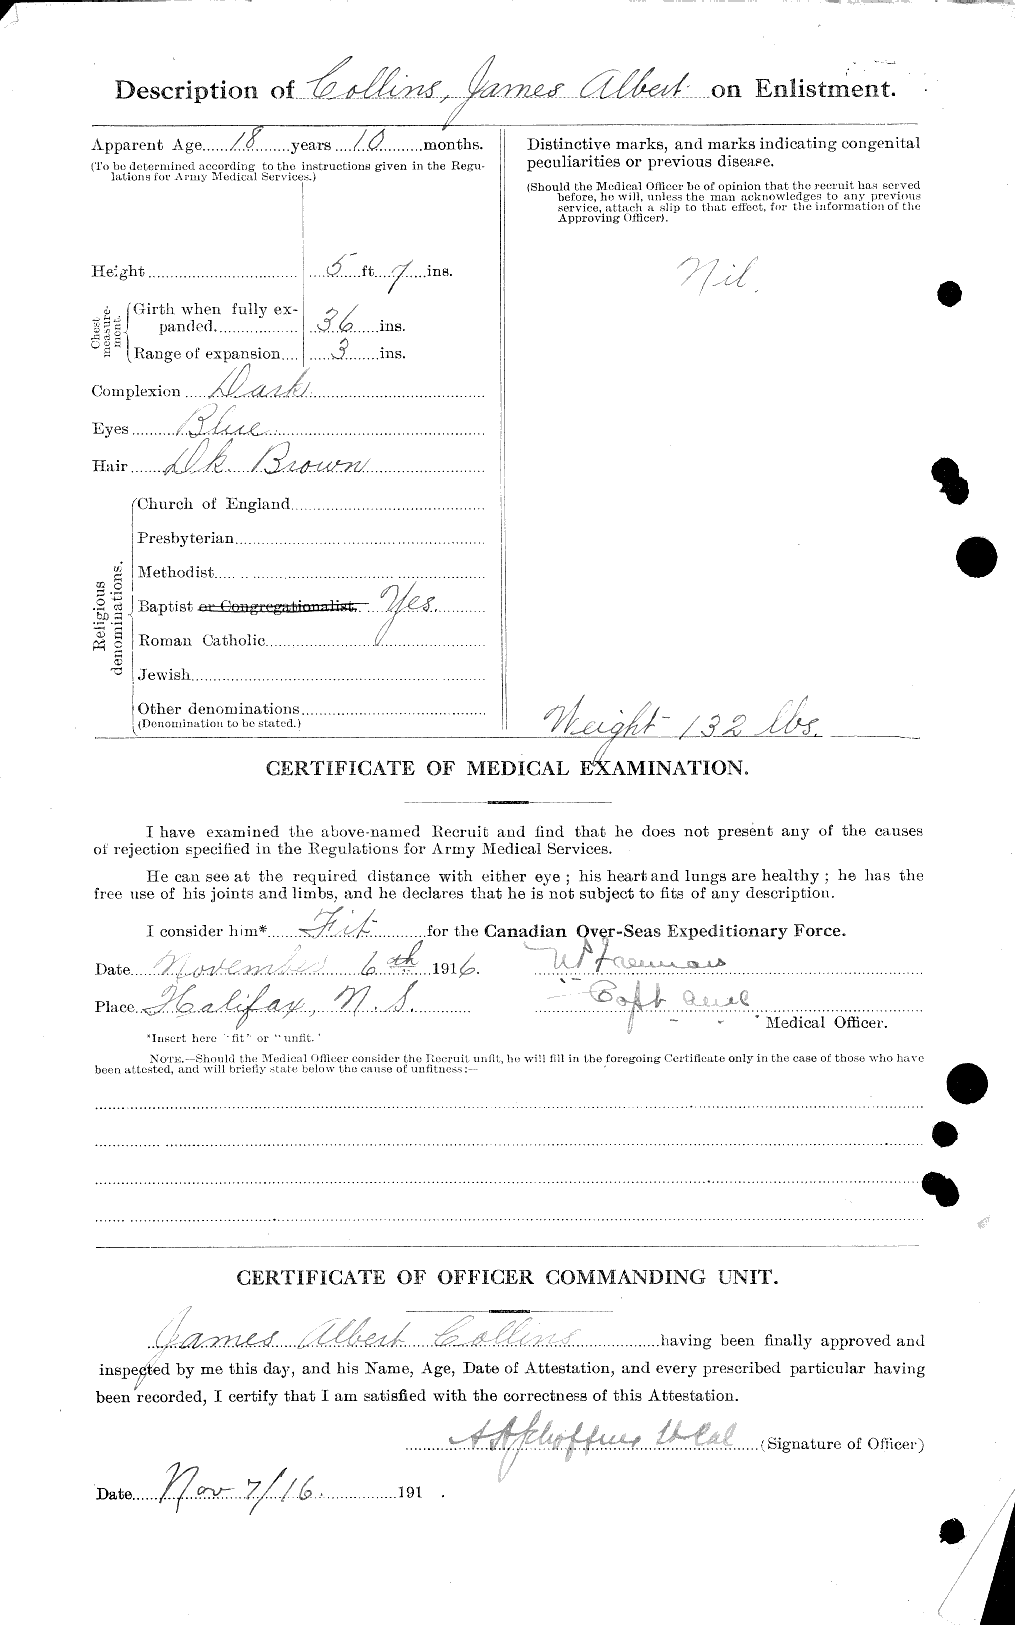 Personnel Records of the First World War - CEF 037925b